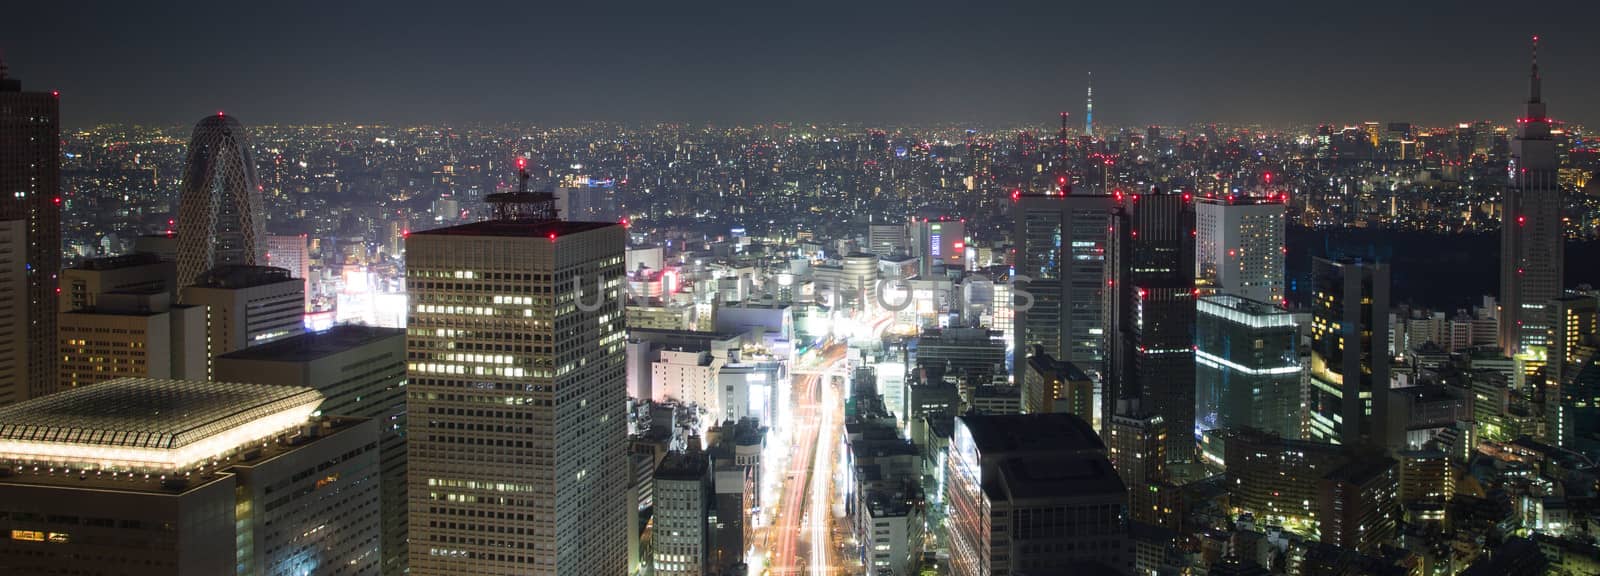 Incredible cityscape of tokyo by night, Japan